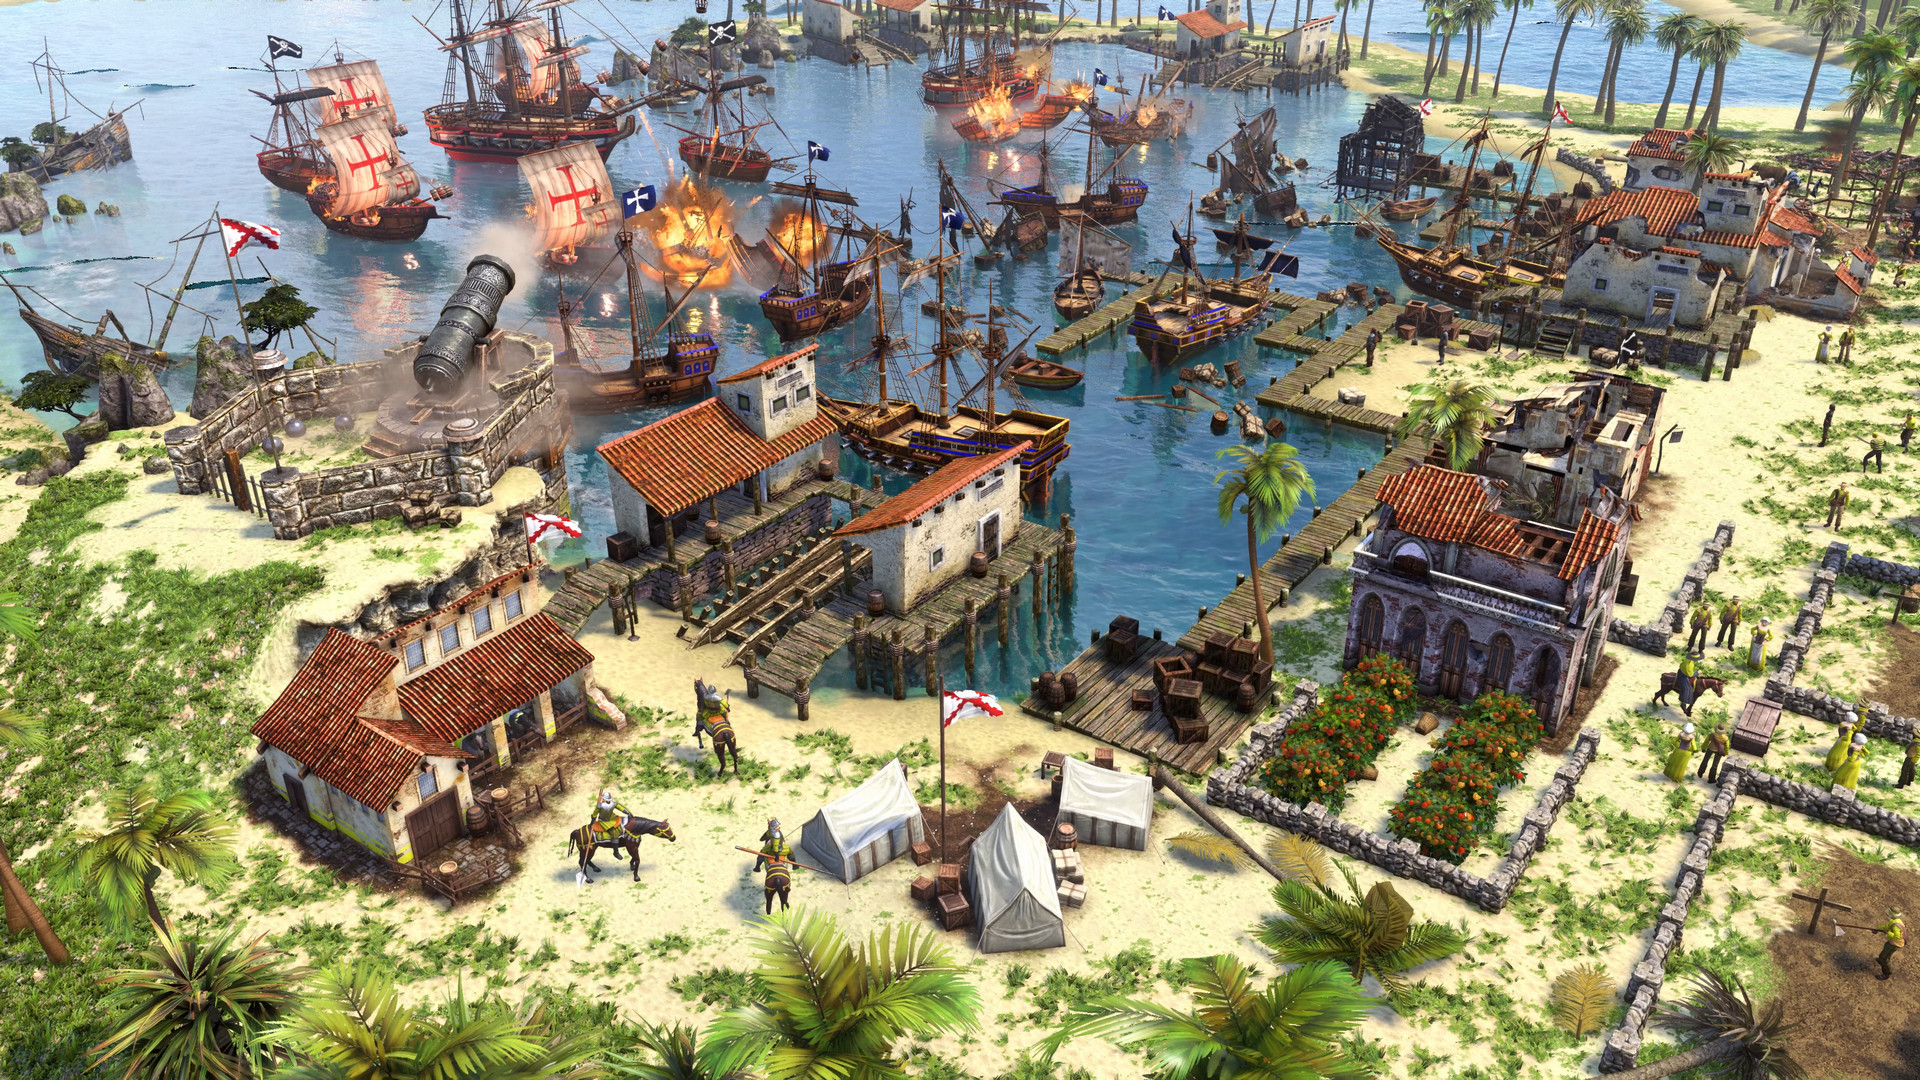 Age of Empires 3: Definitive Edition Kritik - Gamereactor with game character in background